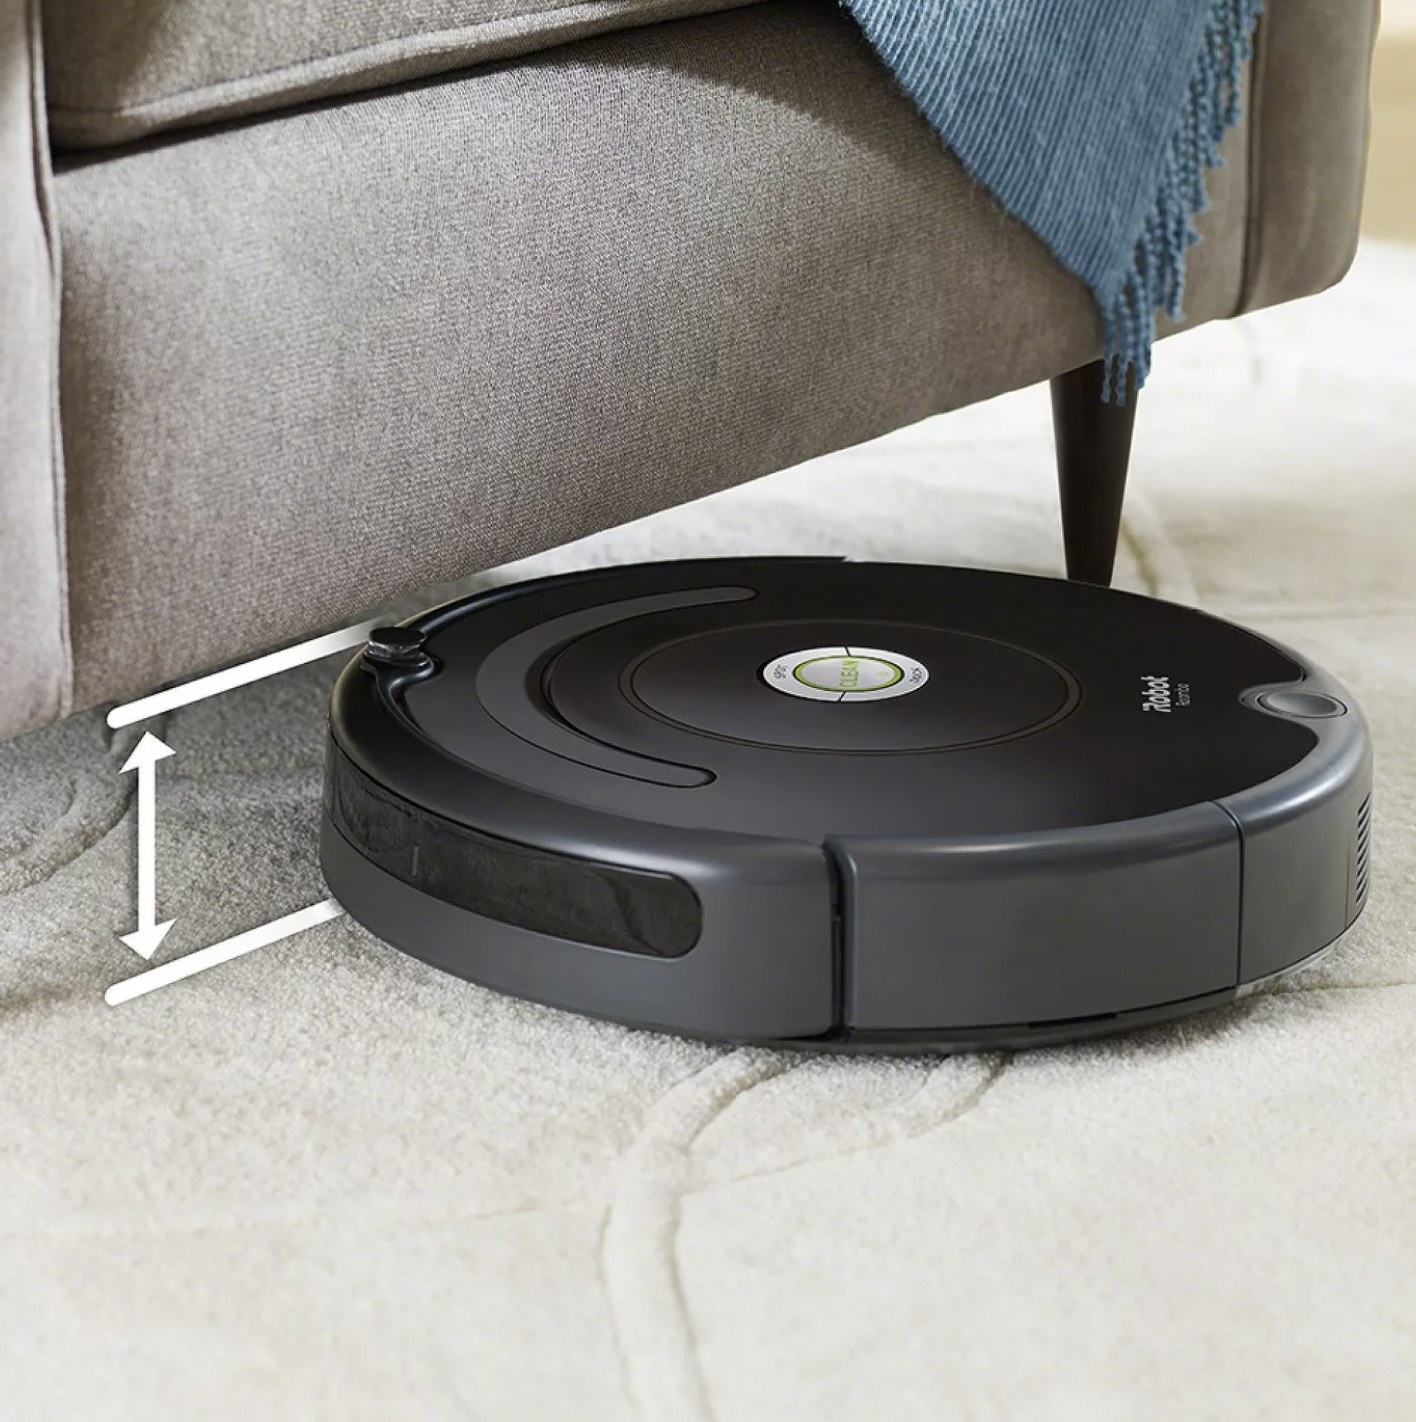 The robot vacuum on carpet navigating under the couch